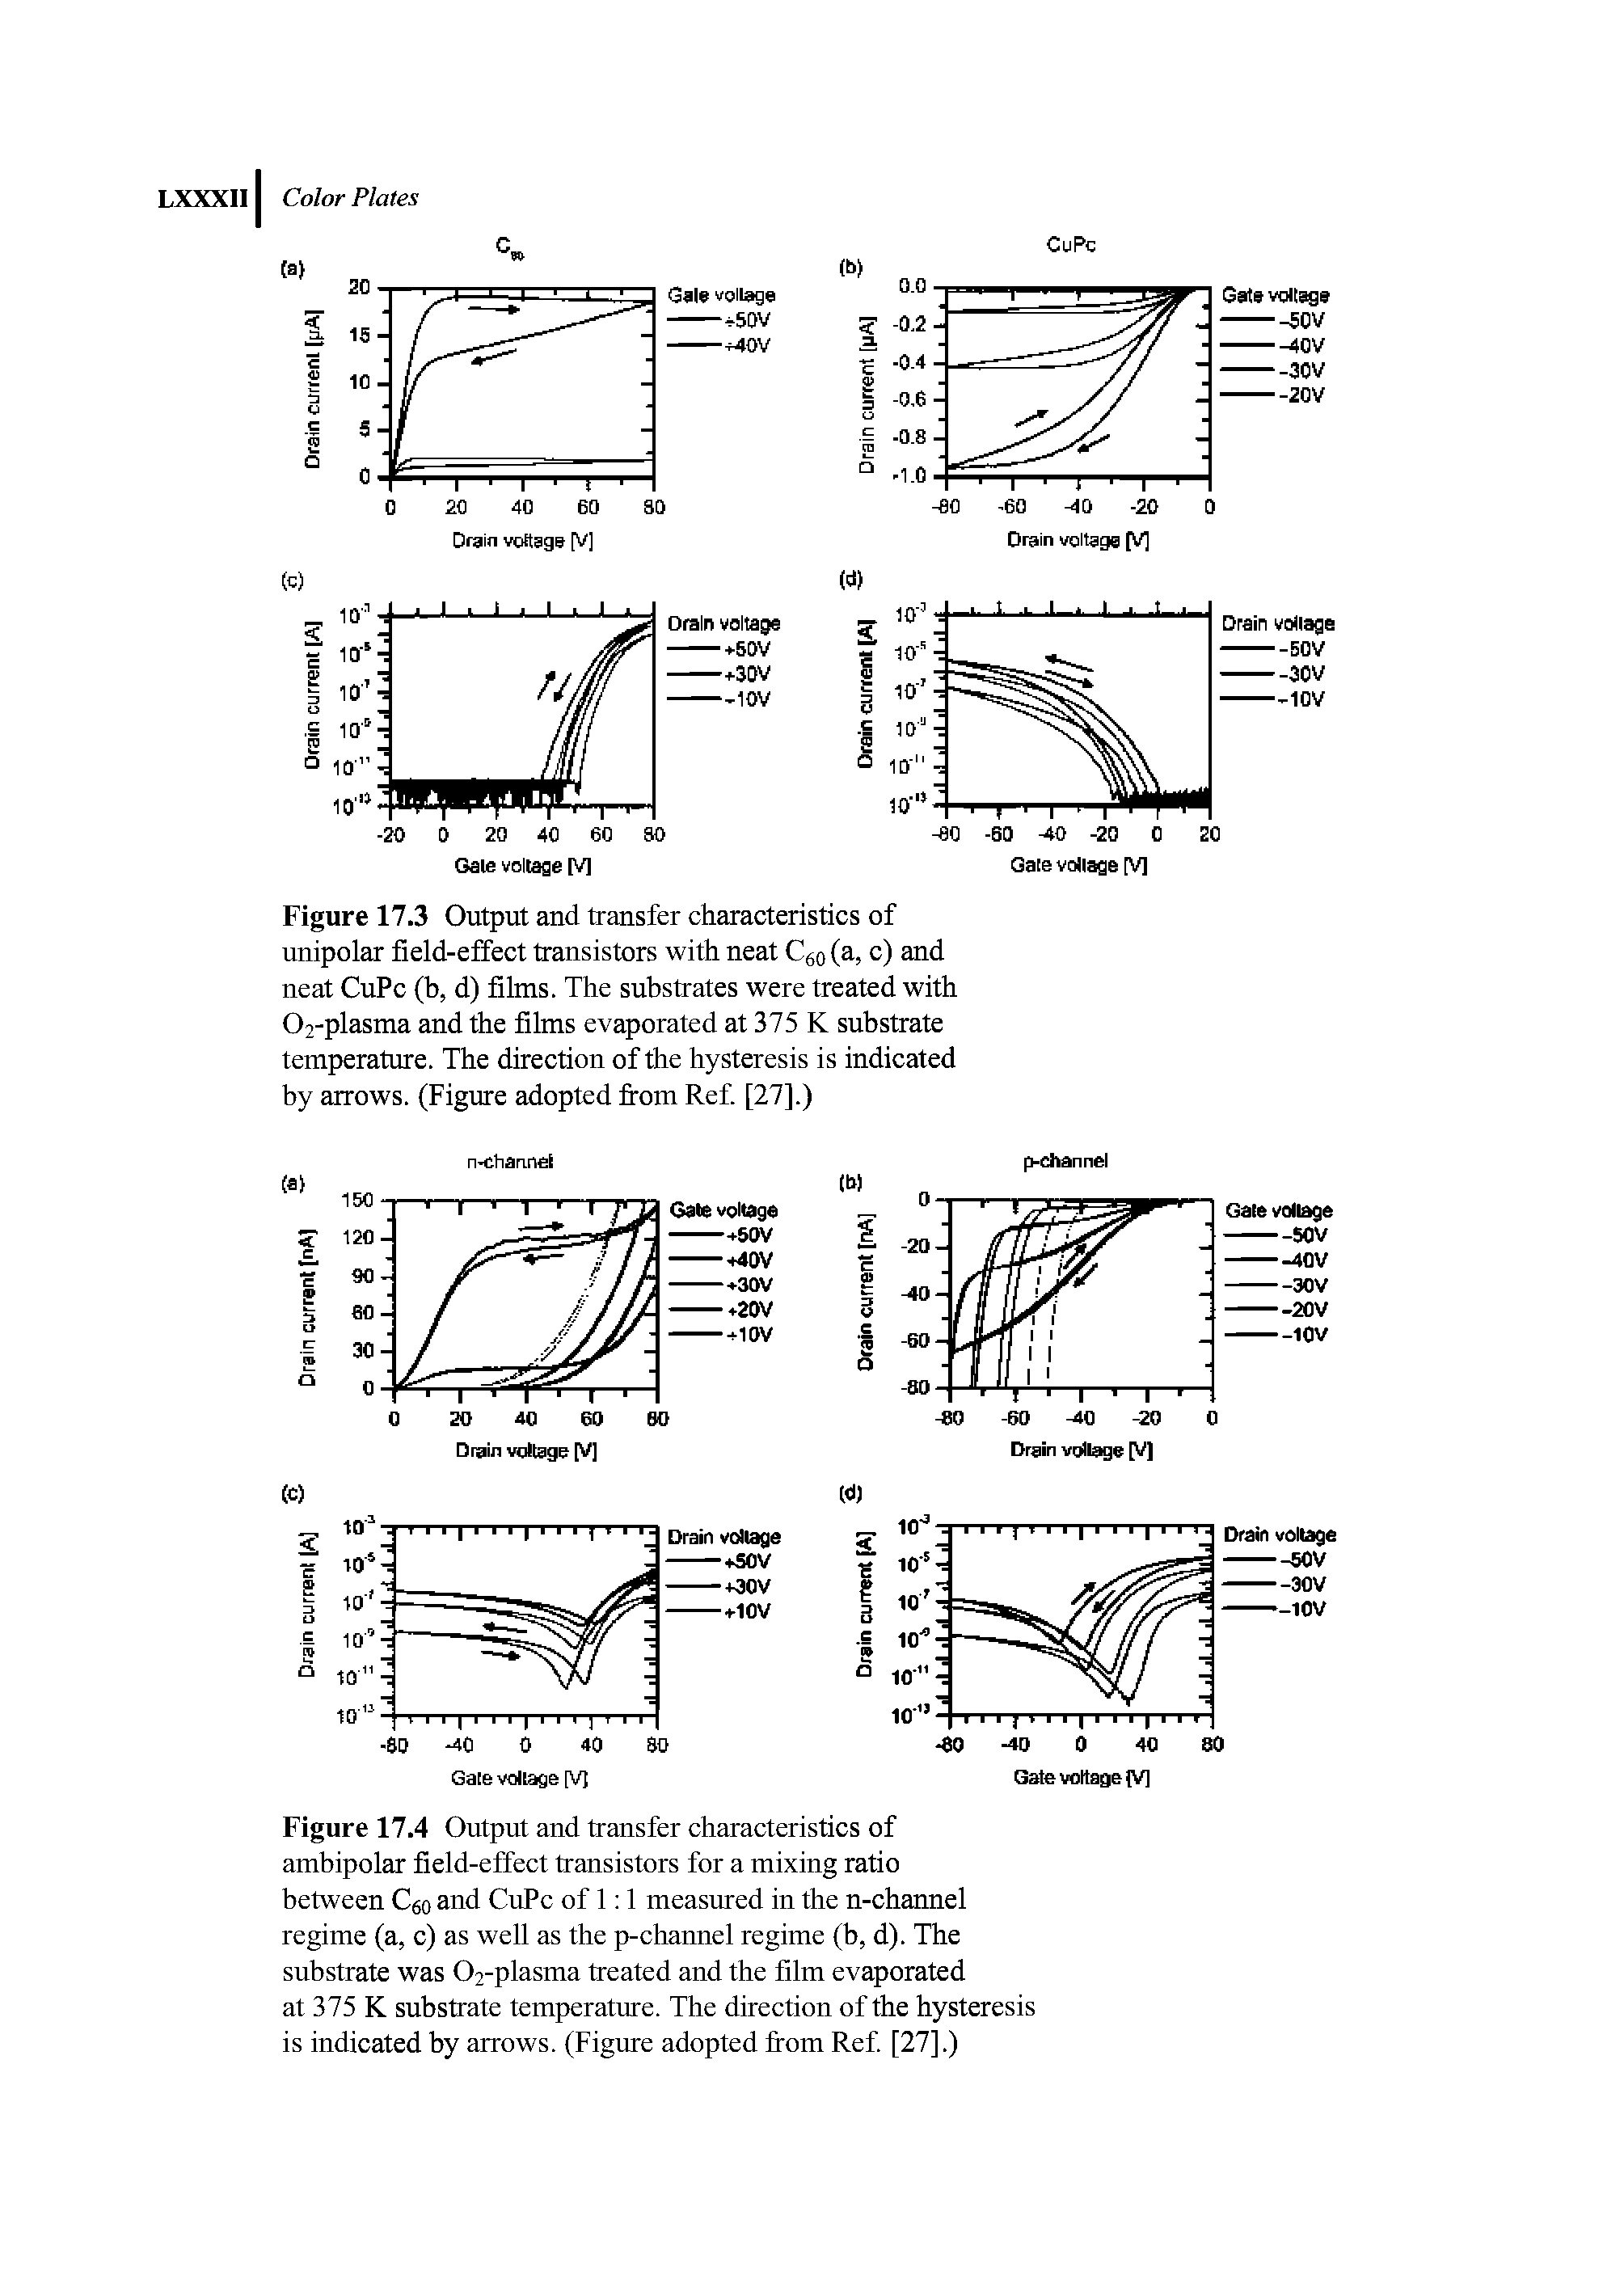 Figure 17.4 Output and transfer characteristics of ambipolar field-effect transistors for a mixing ratio between Ceo and CuPc of 1 1 measured in the n-channel regime (a, c) as well as the p-channel regime (b, d). The substrate was 02-plasma treated and the film evaporated at 375 K substrate temperature. The direction of the hysteresis is indicated by arrows. (Figure adopted from Ref. [27].)...